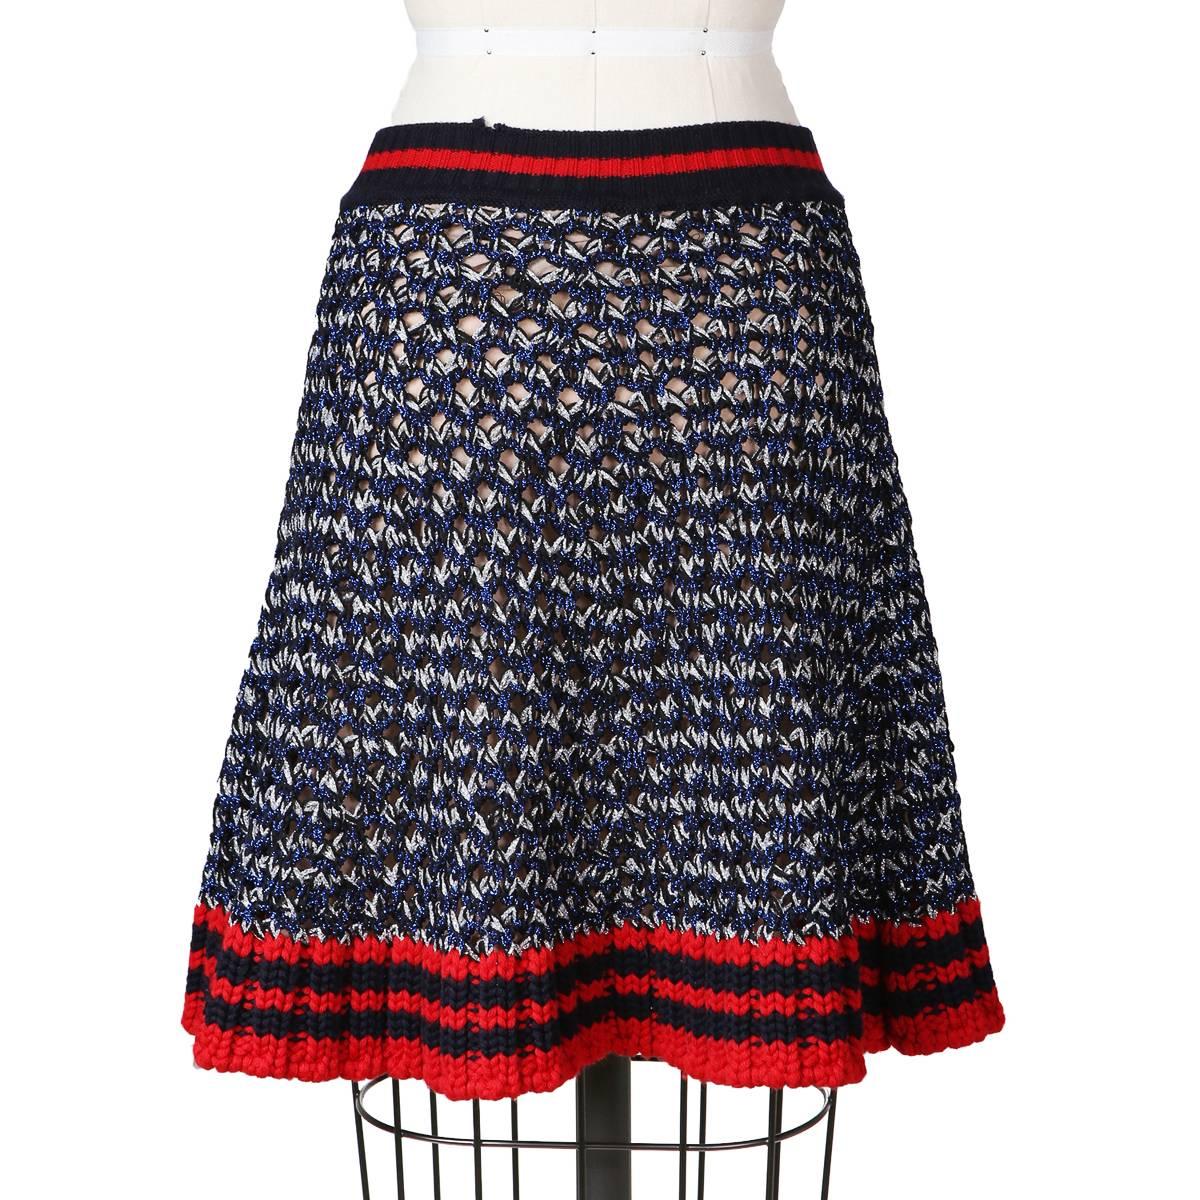 Recent skirt from Gucci.  Features an ivy league / varsity motif knit with metallic threads to catch the light.  Flared cut and has a nude silk lining.  

Size XS
23